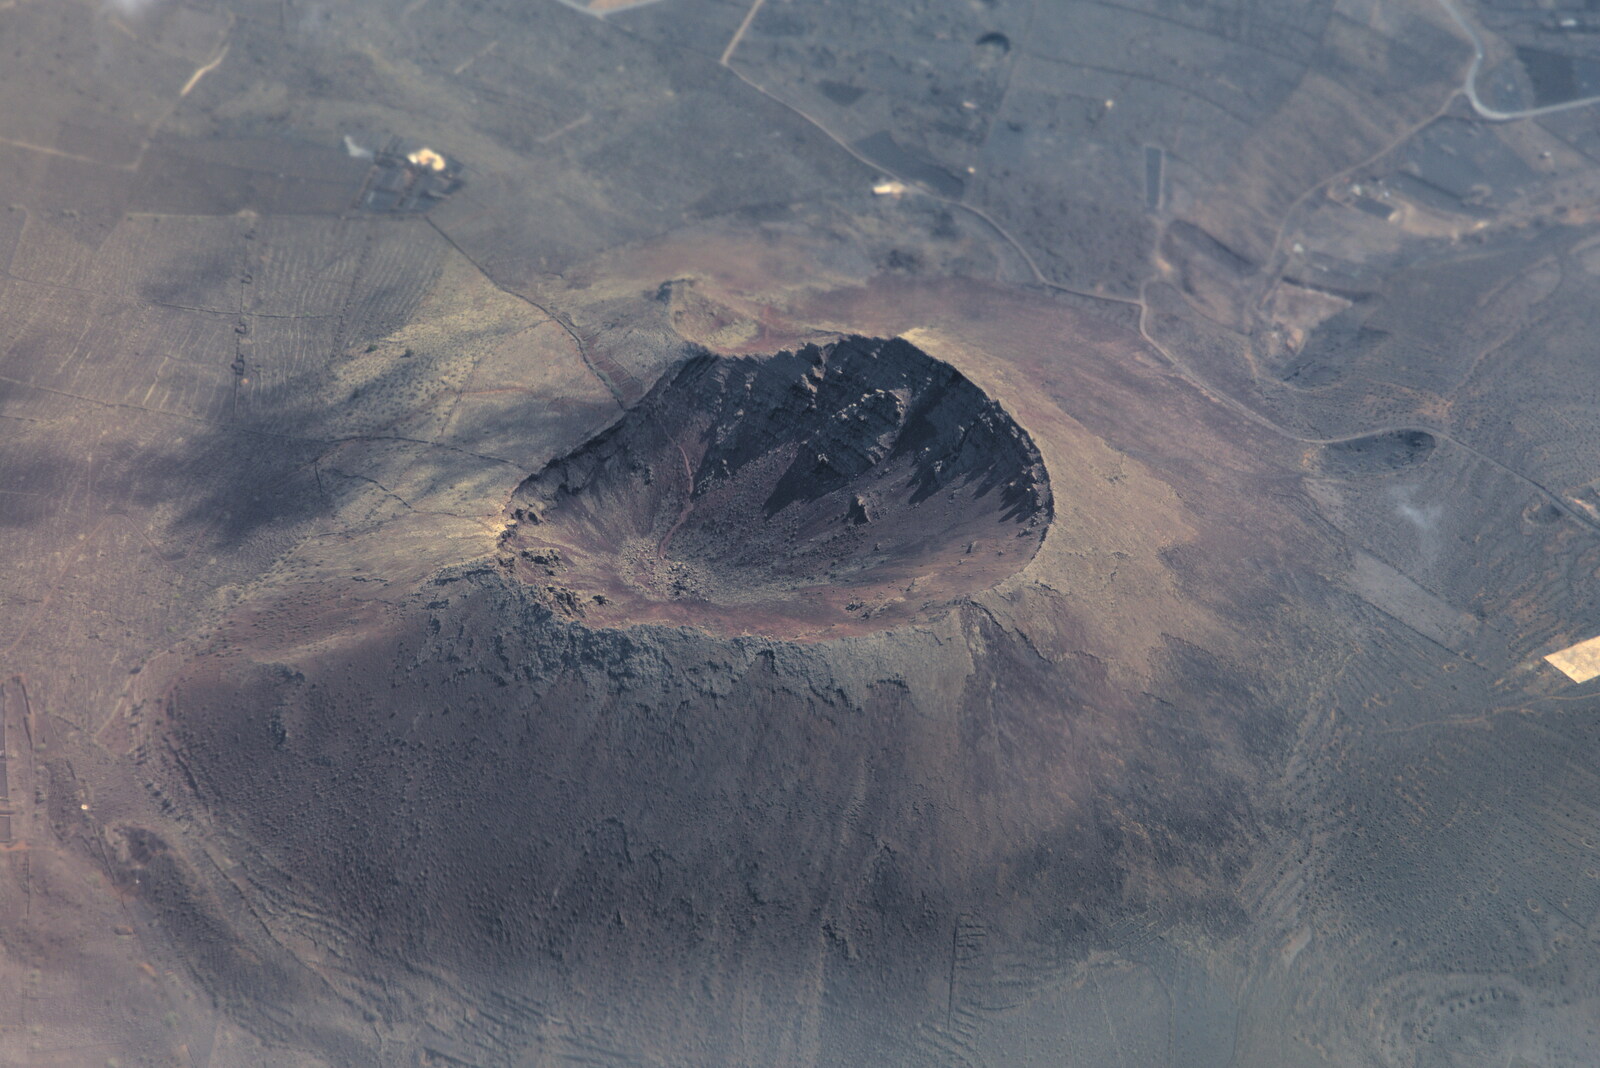 A cool view of a volcano crater from The Volcanoes of Lanzarote, Canary Islands, Spain - 27th October 2021